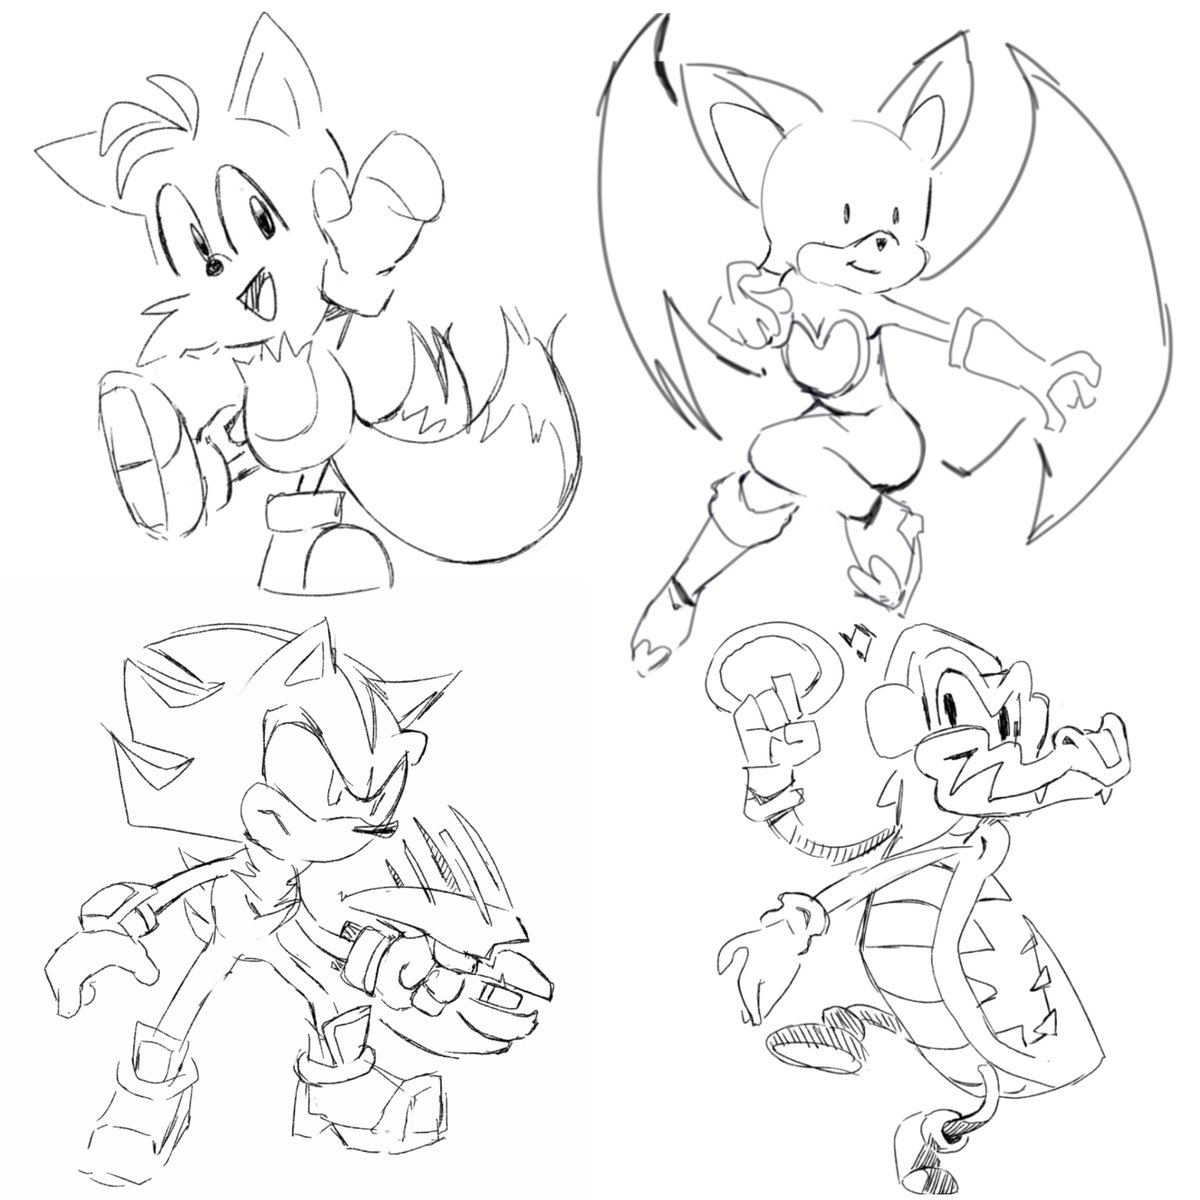 sketched out some sonic characters with @R0zzdawg 